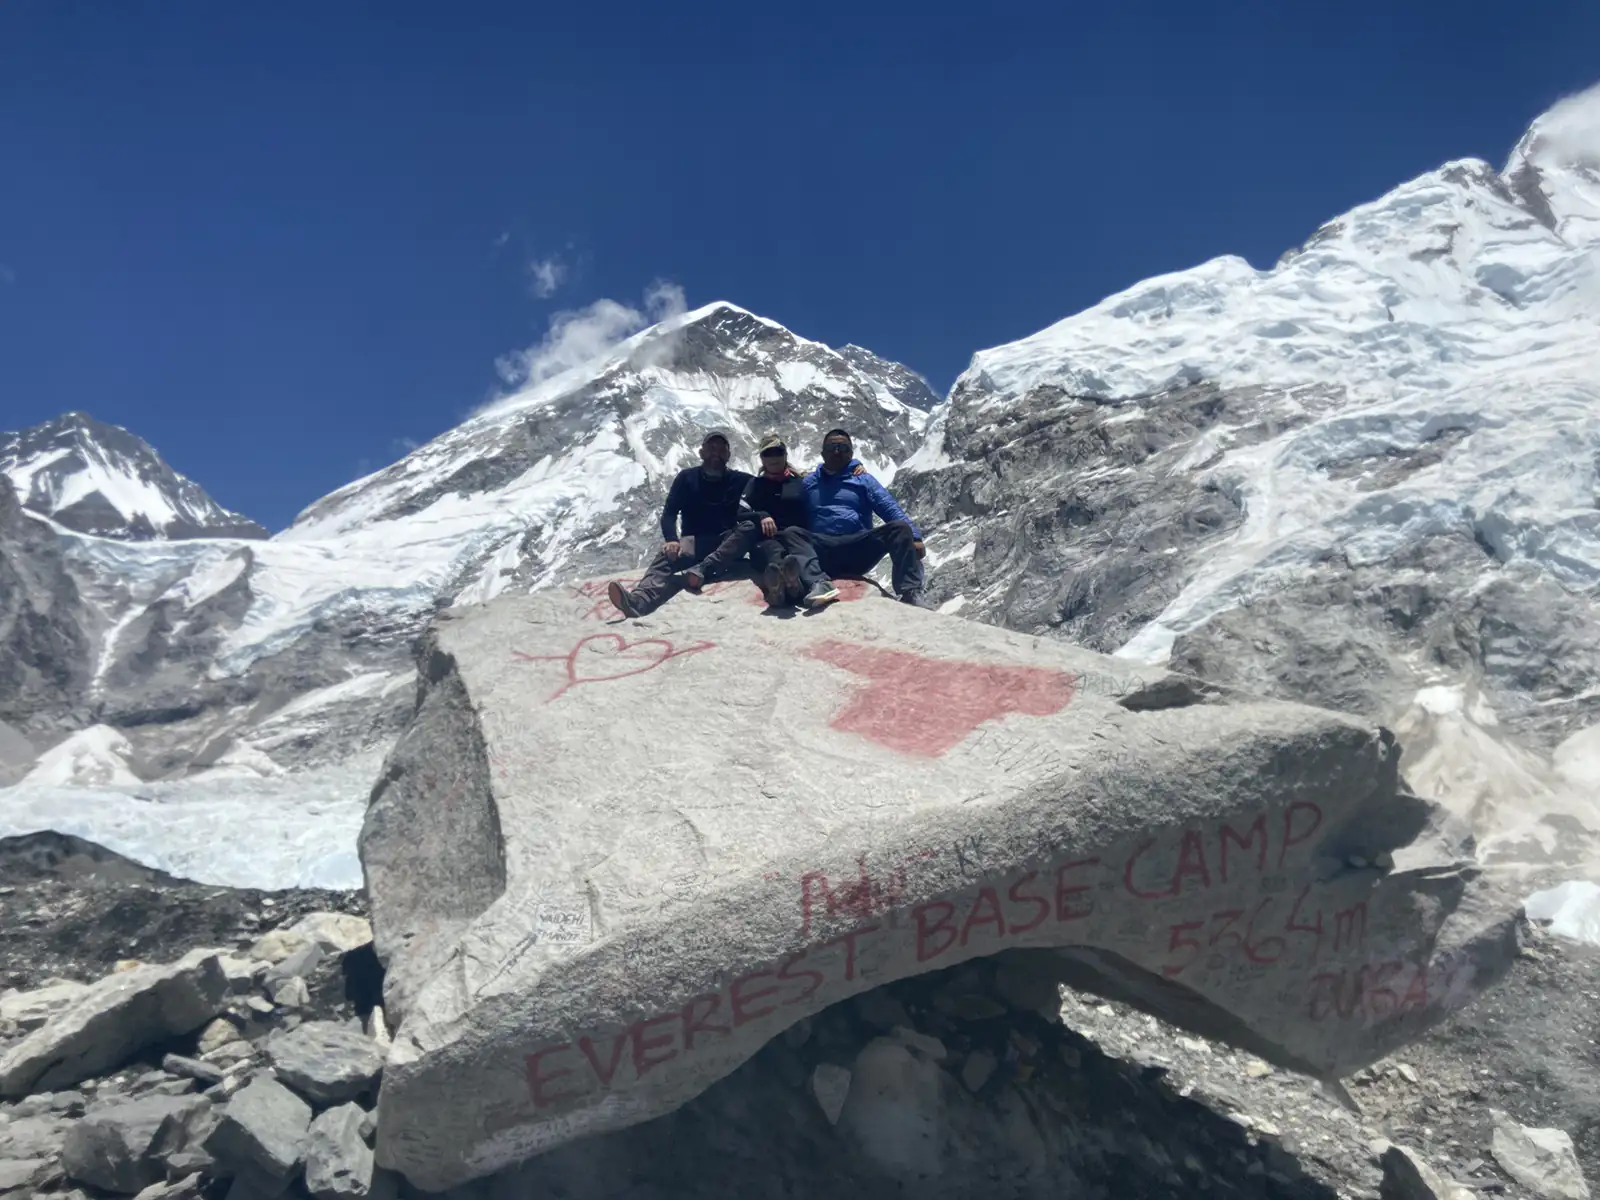 Trekkers from Ireland at Everest Base Camp